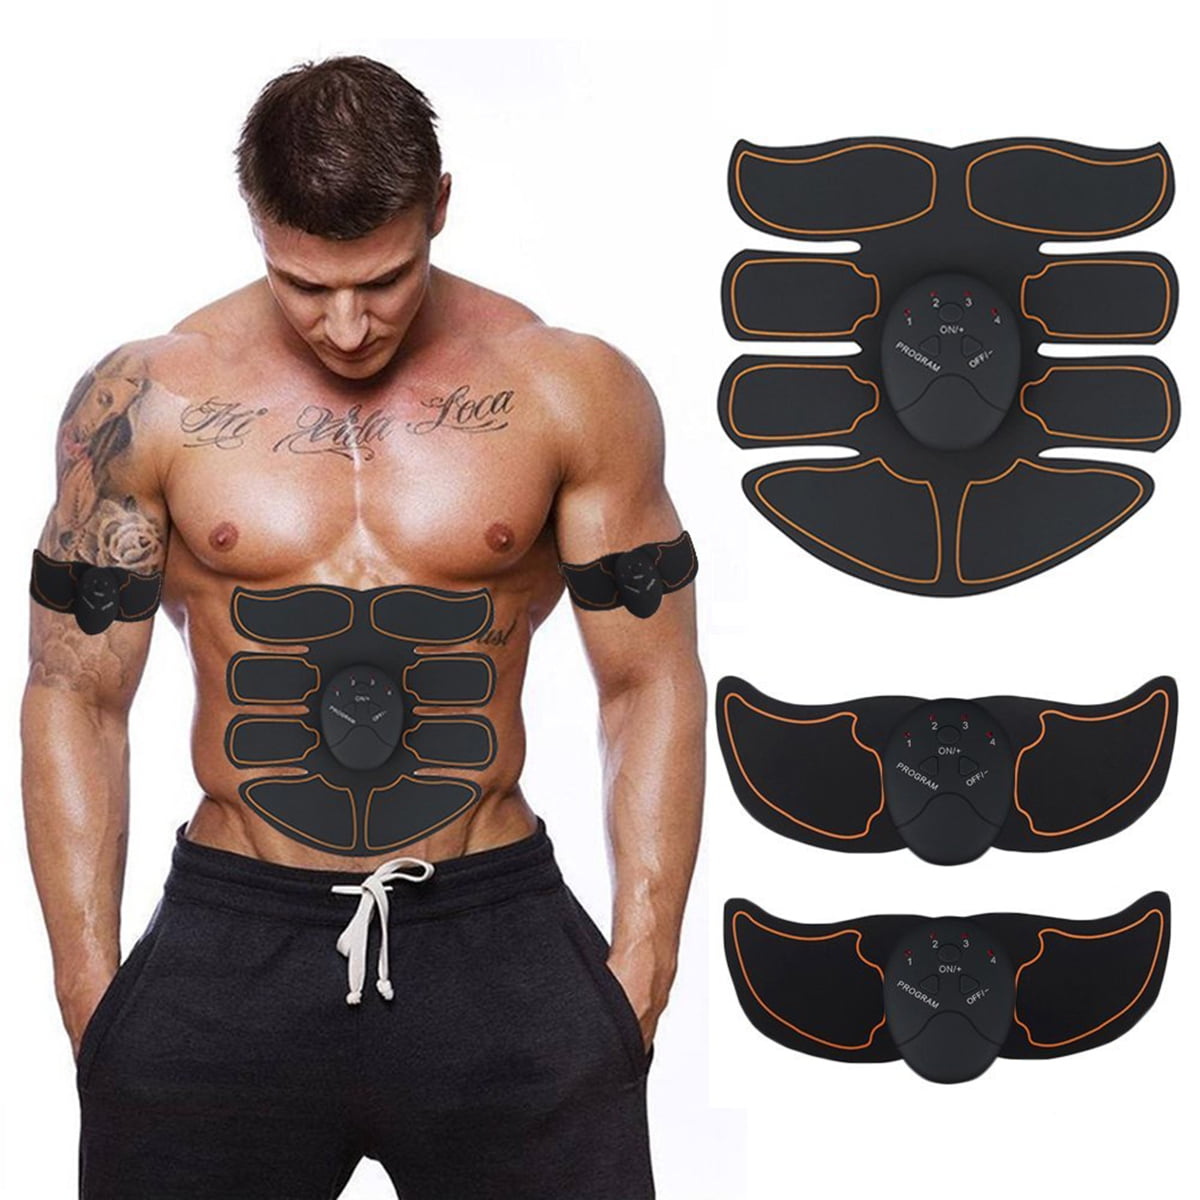 EMS Muscle ABS Fit Training Gear Abdominal Body Home Exercise Shape Fitness Set 